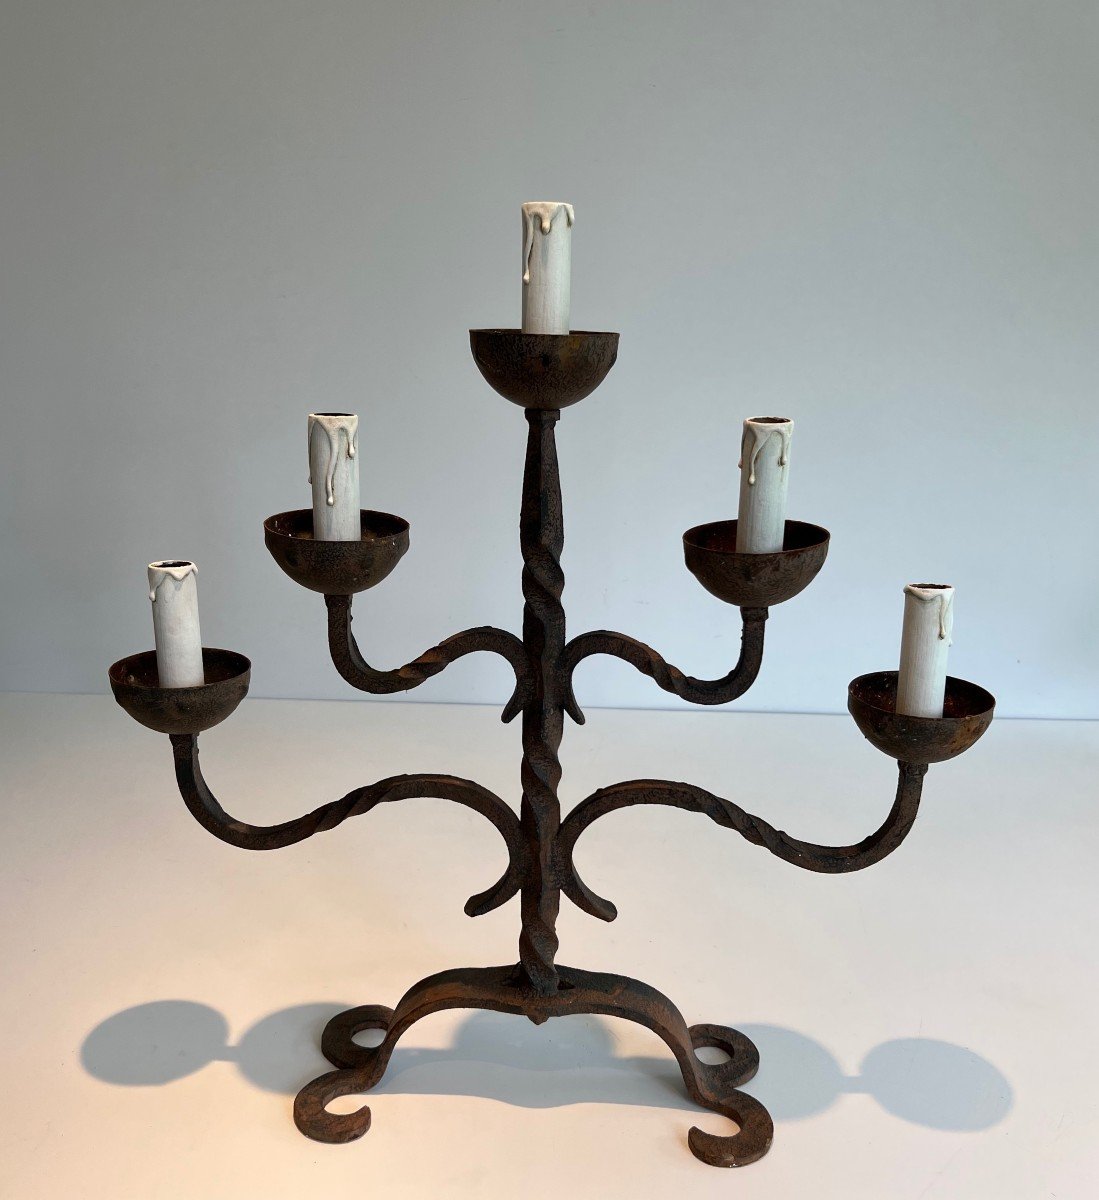 5 Lights Wrought Iron Candlestick 5 Lights Wrought Iron Candlestick. French Work. Circa 1950